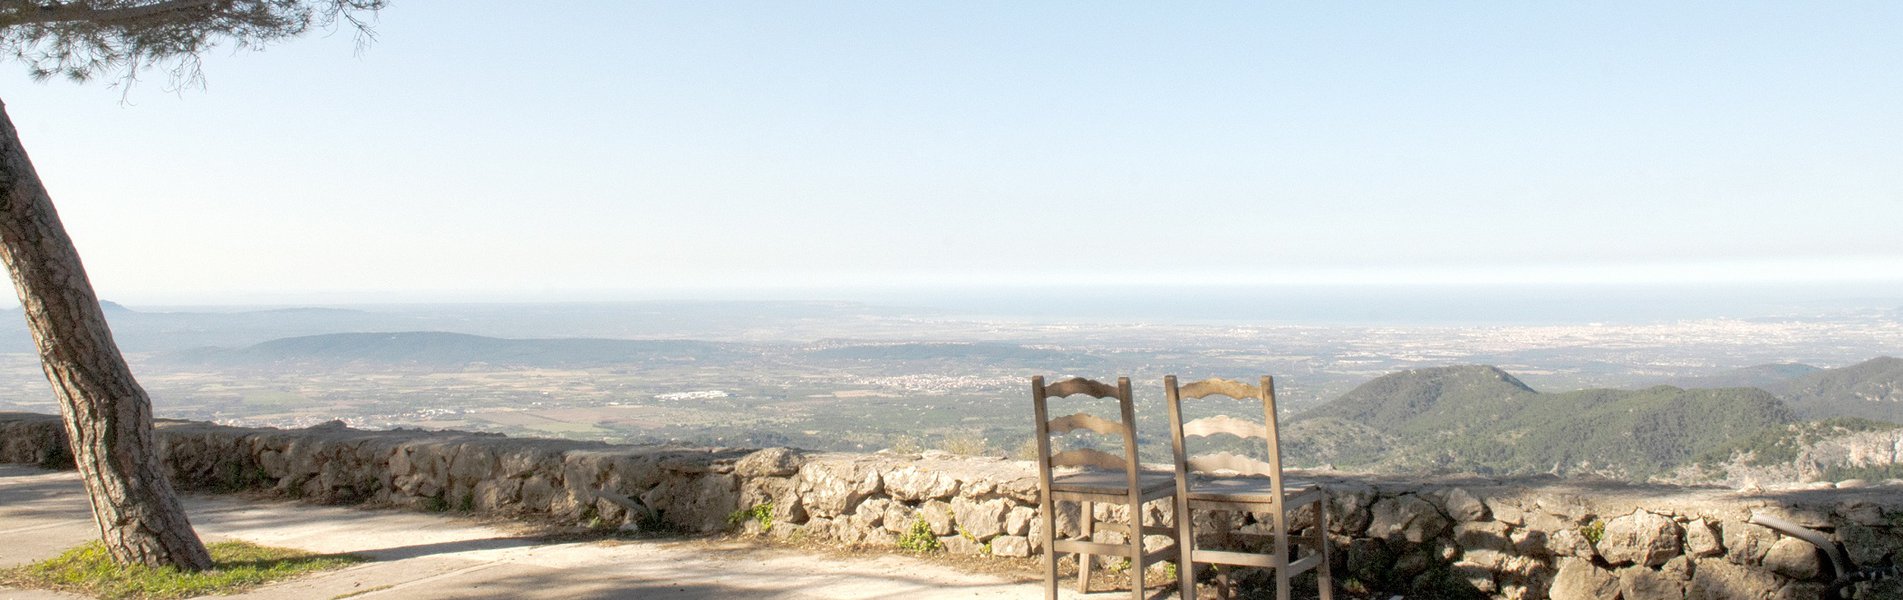 Views from the Castle of Alaró